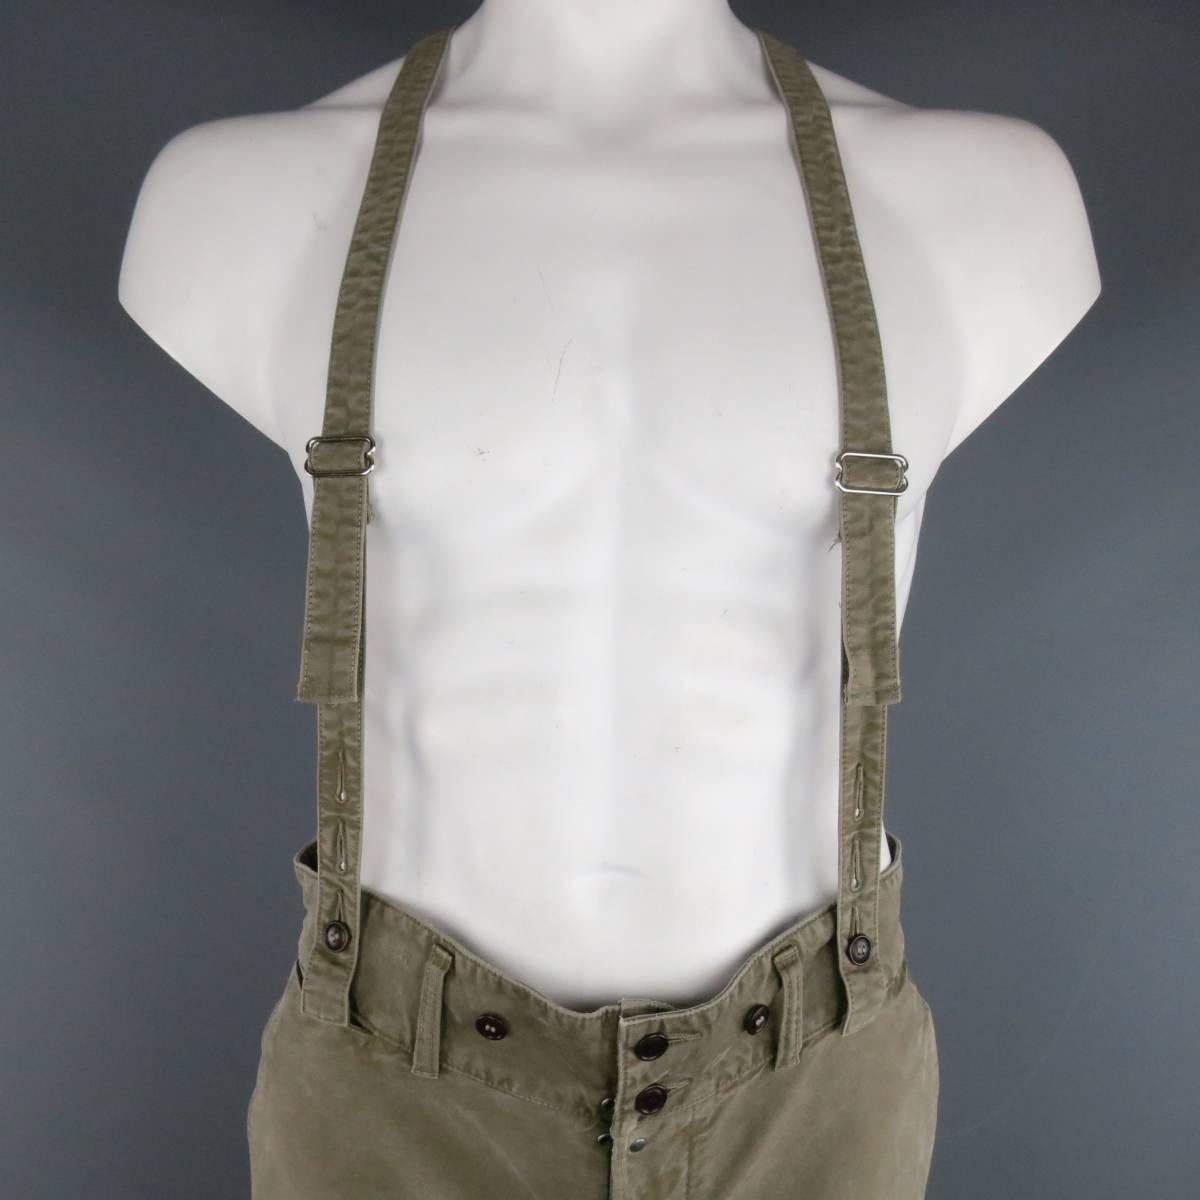 VISVIM casual pants in a washed light olive green cotton chino fabric featuring a thick two button waistband, double button patch pocket back, V cut back with adjustable back tab, and optional suspenders. Made in Japan.
 
Excellent Pre-Owned